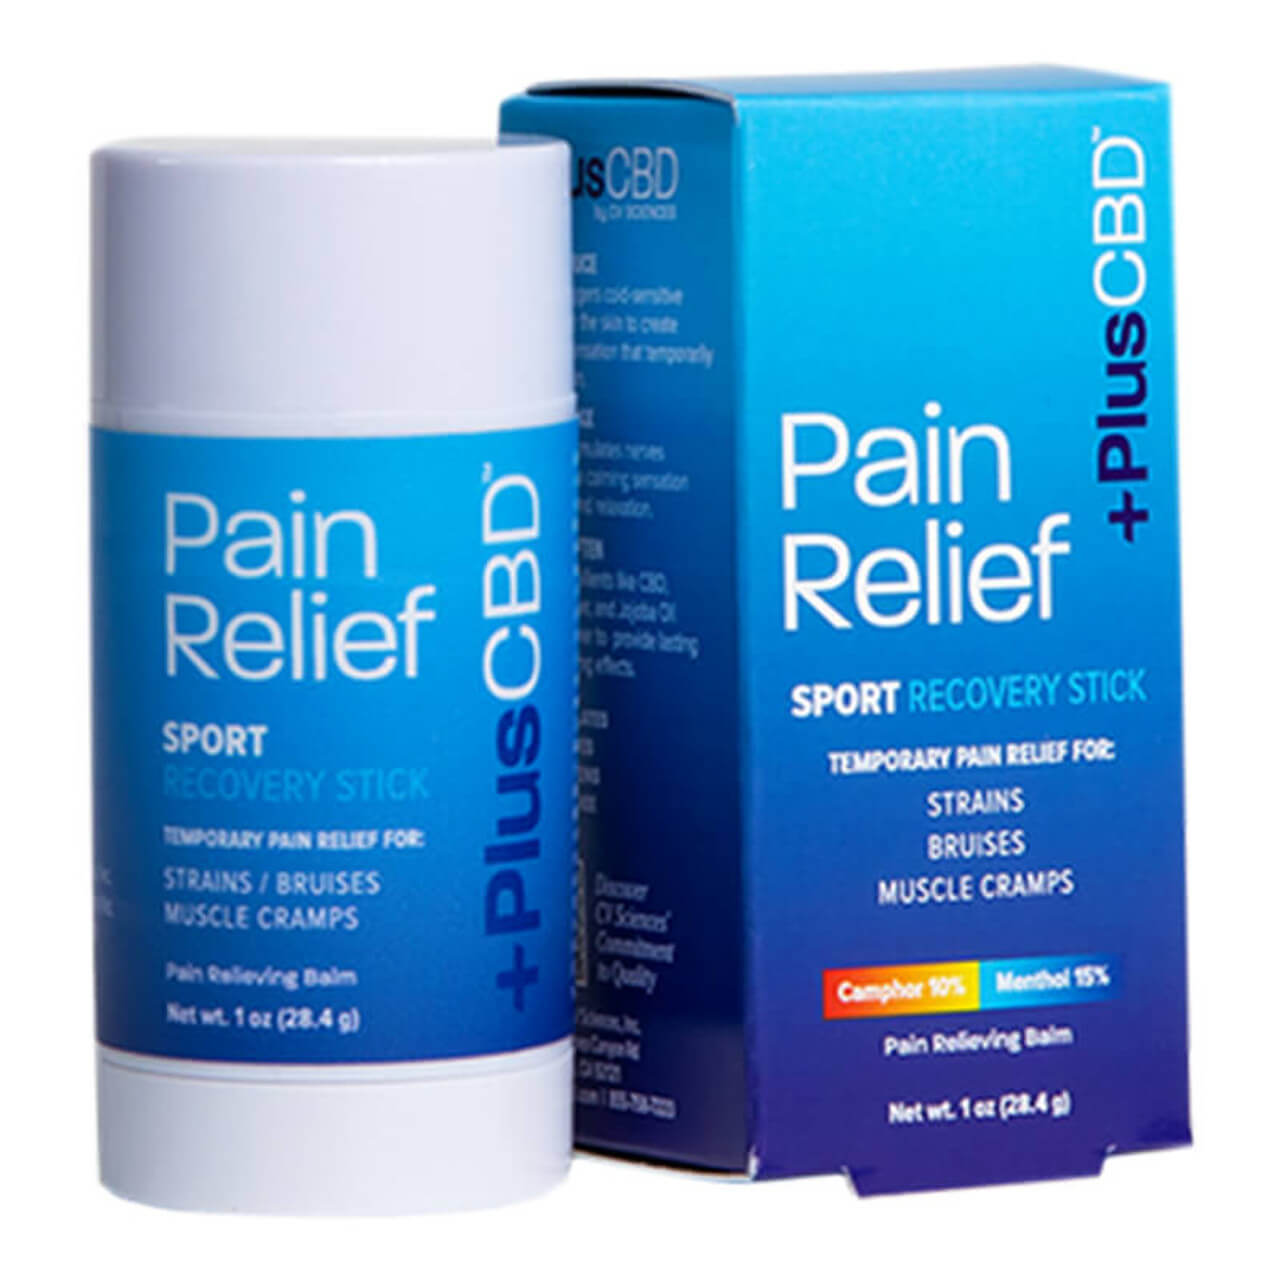 PlusCBD Oil Pain Relief Sport Recovery Stick 750mg